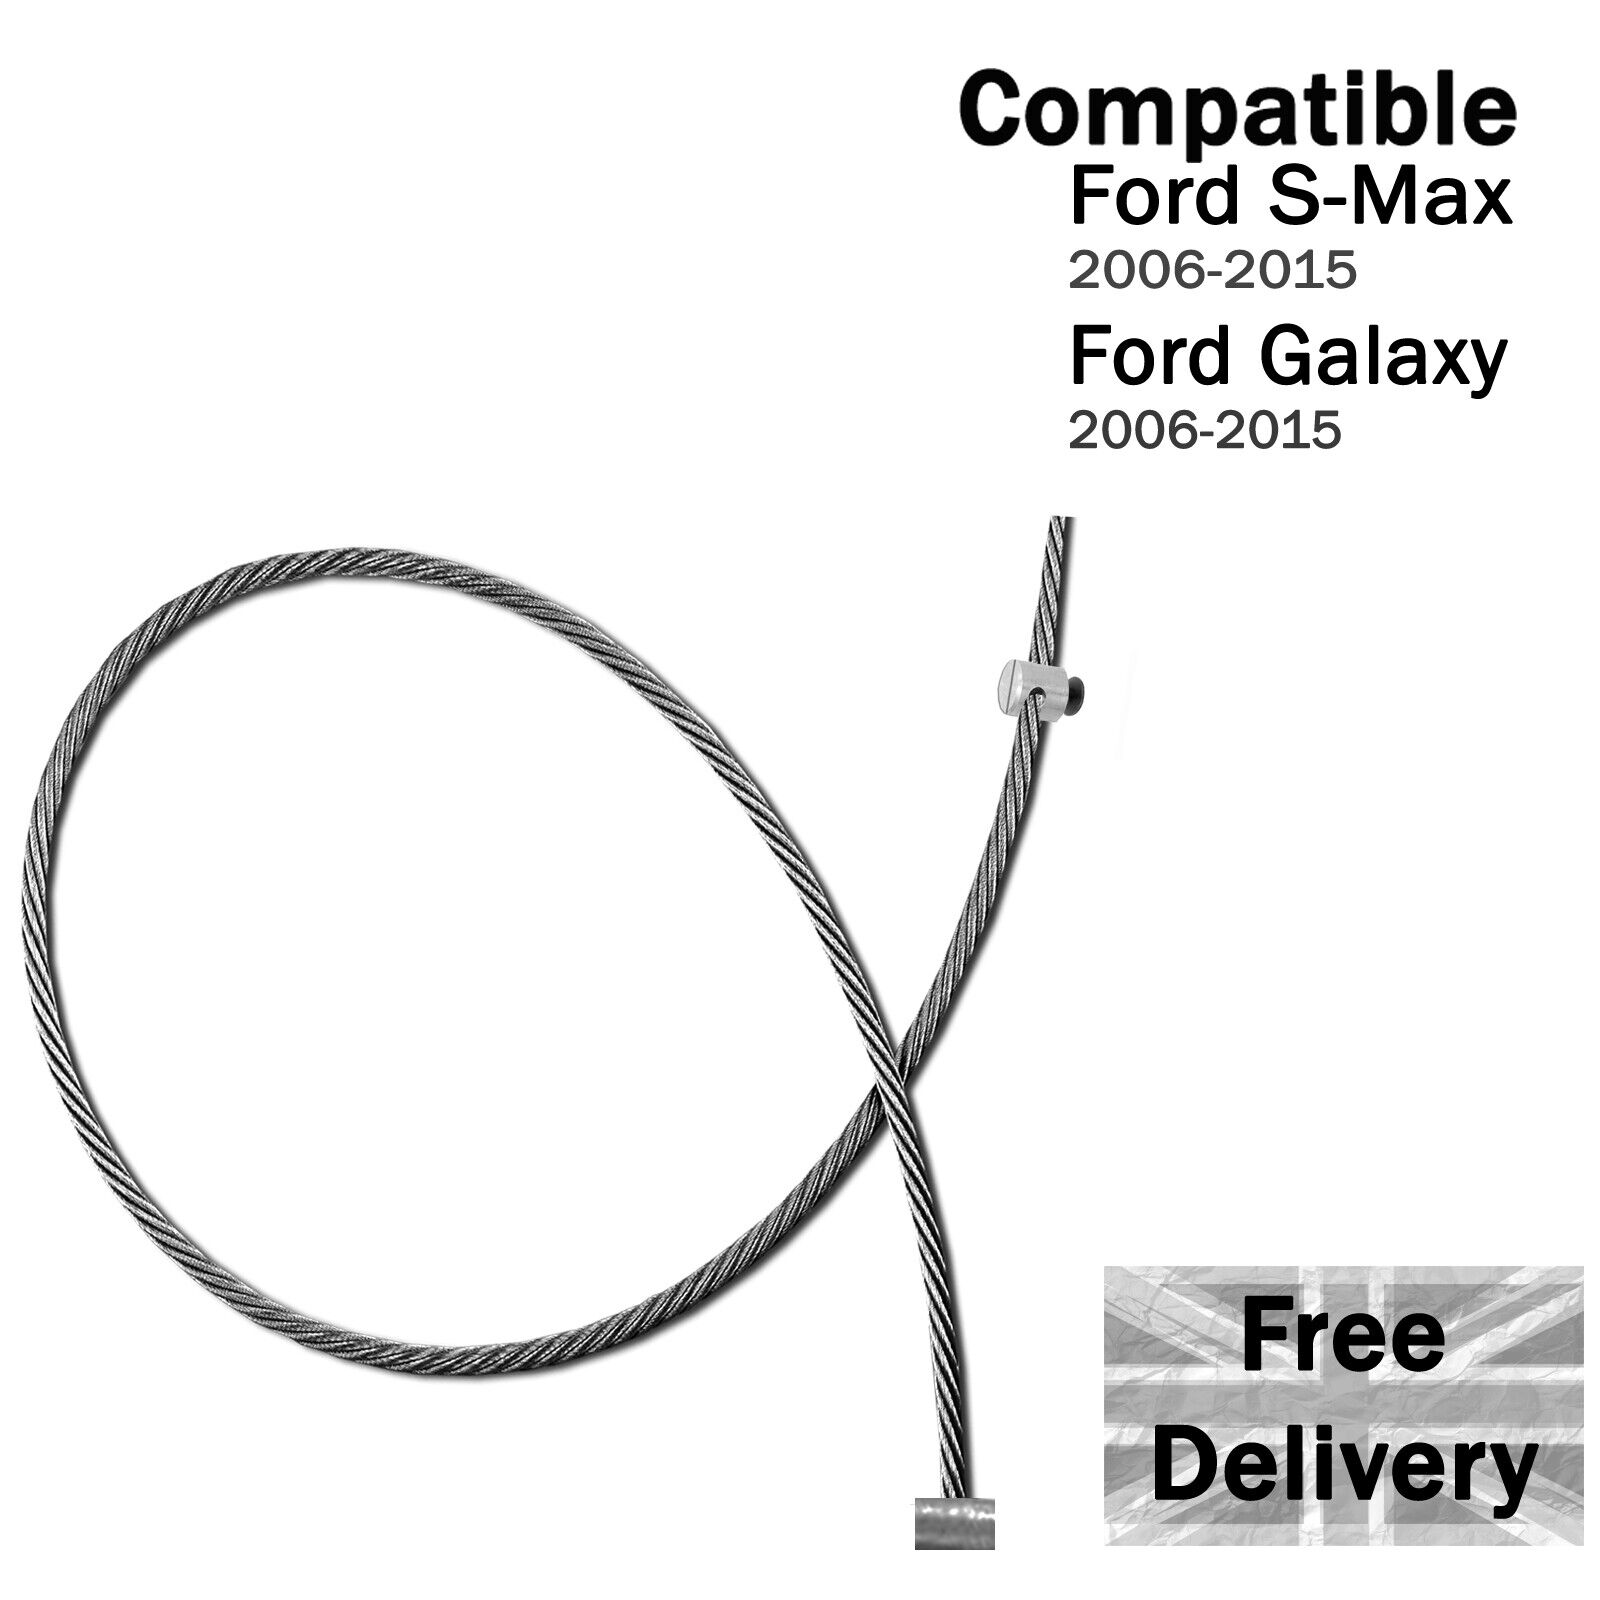 FORD S-MAX GALAXY HANDBRAKE LEVER CABLE Rapid rise Manufacturer OFFicial shop - 2006 RELEASE 201